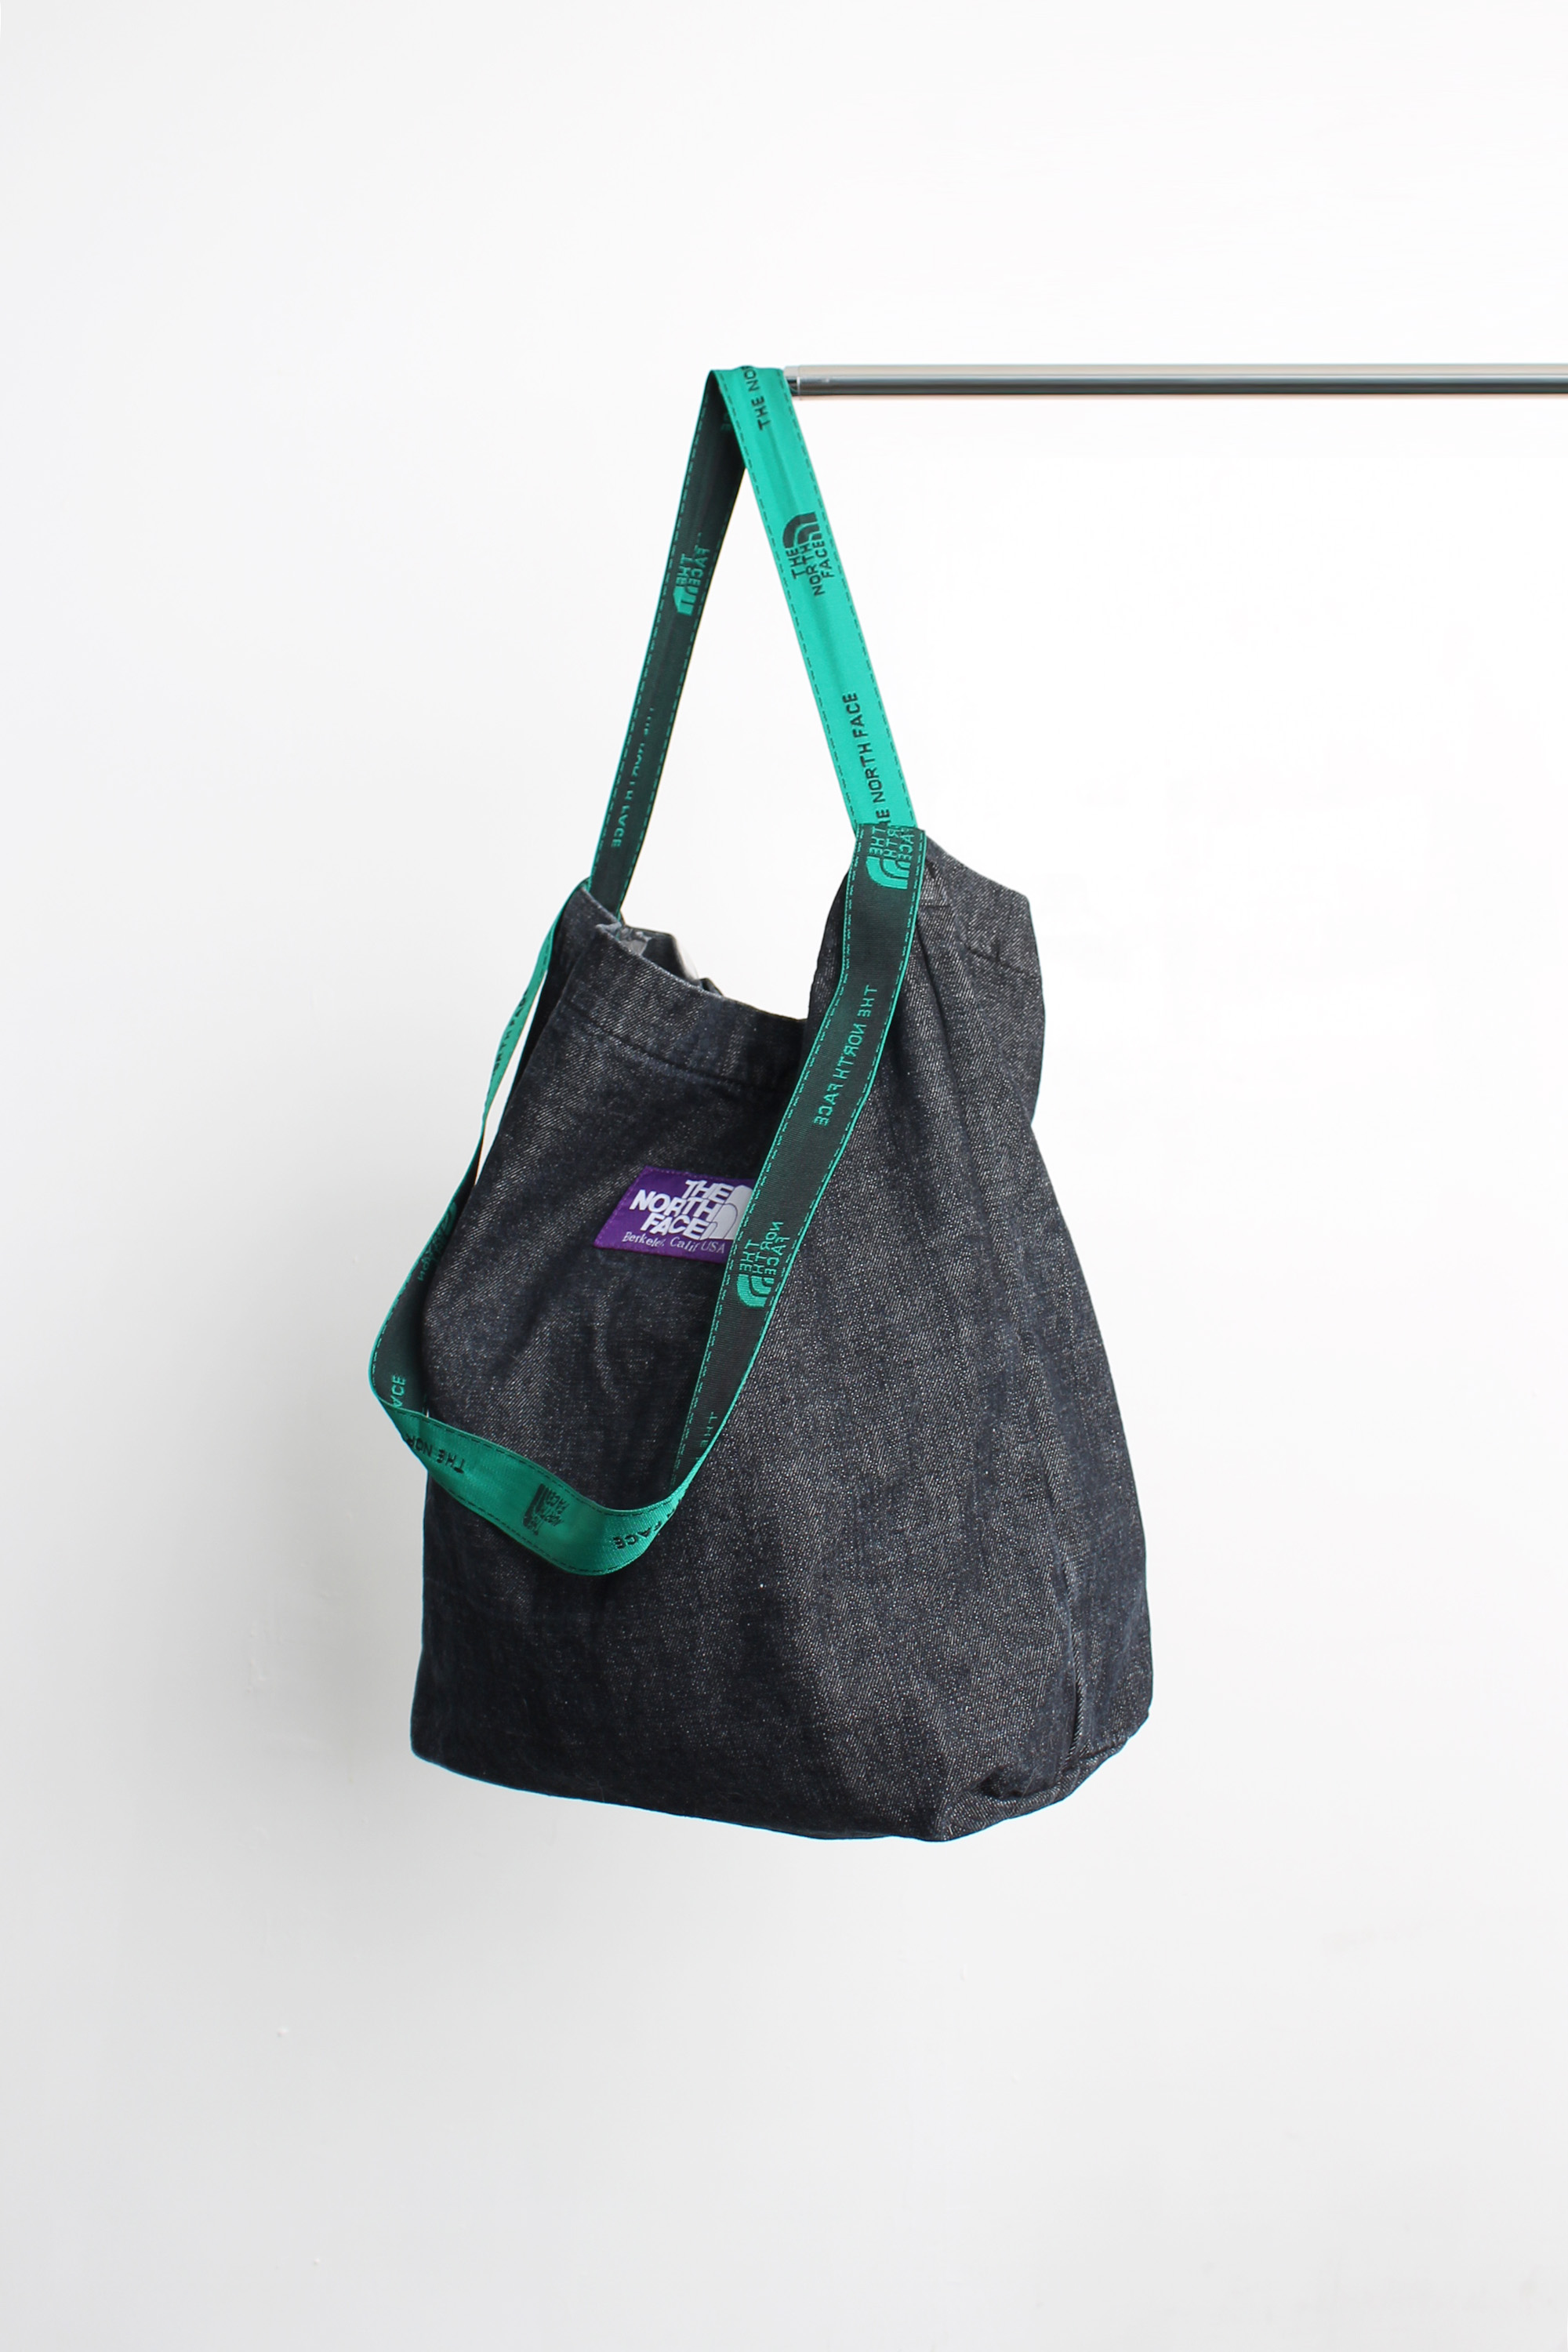 THE NORTH FACE PURPLE LABEL 2way bag